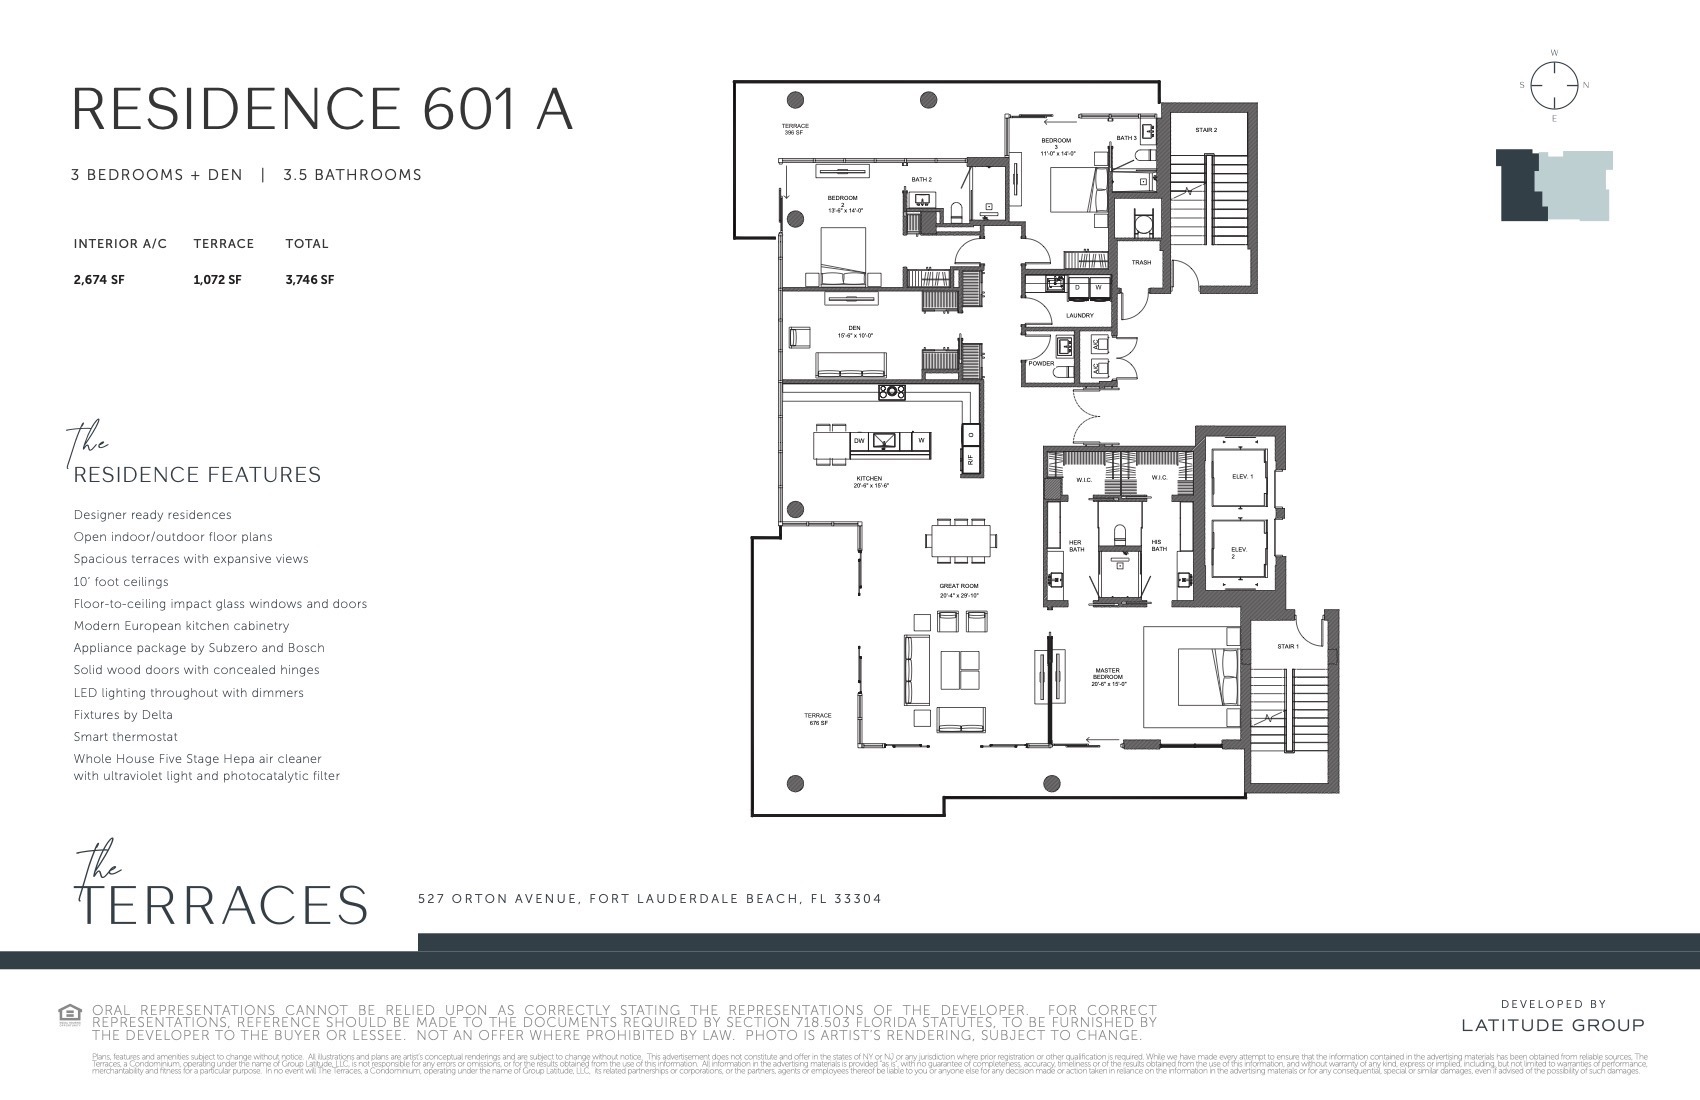 Floor Plan for The Terraces Fort Lauderdale Floorplans, Residence 601 A